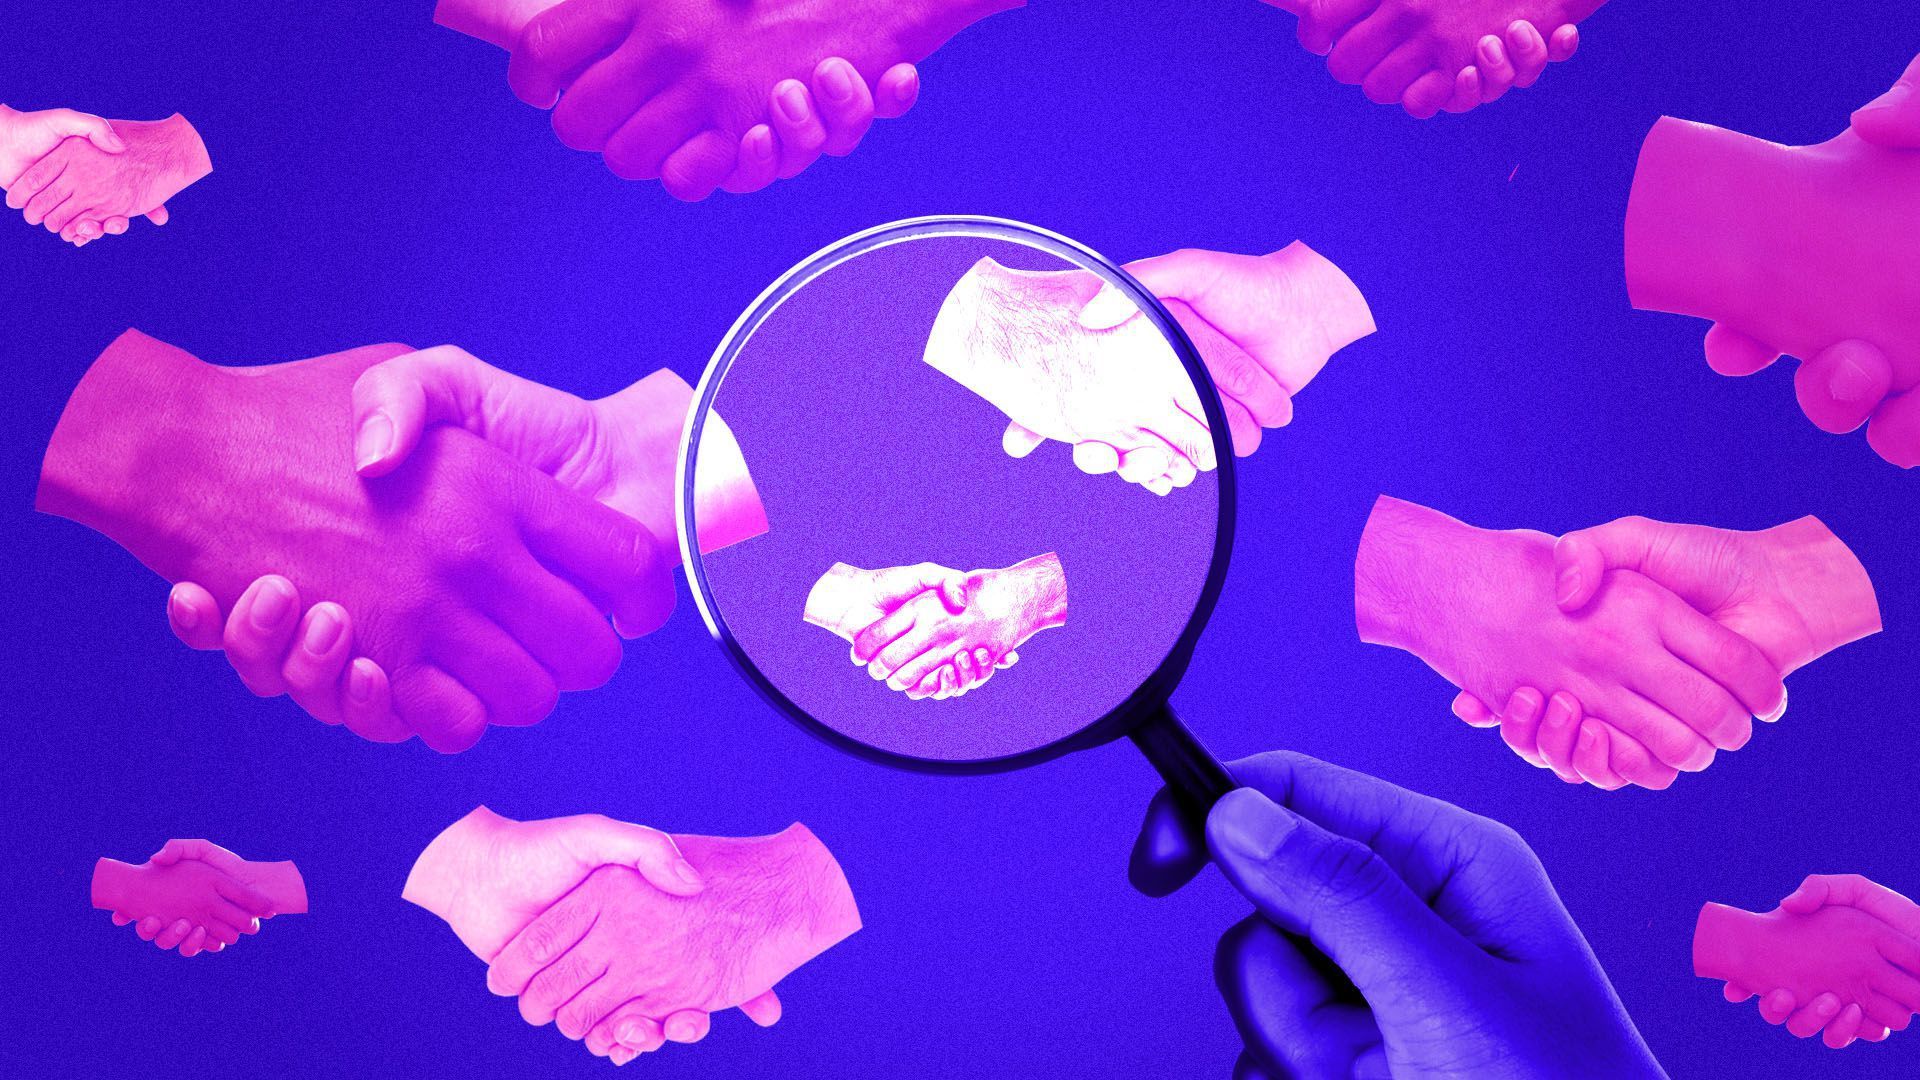 a magnifying glass looking at various hands engaged in hand shakes